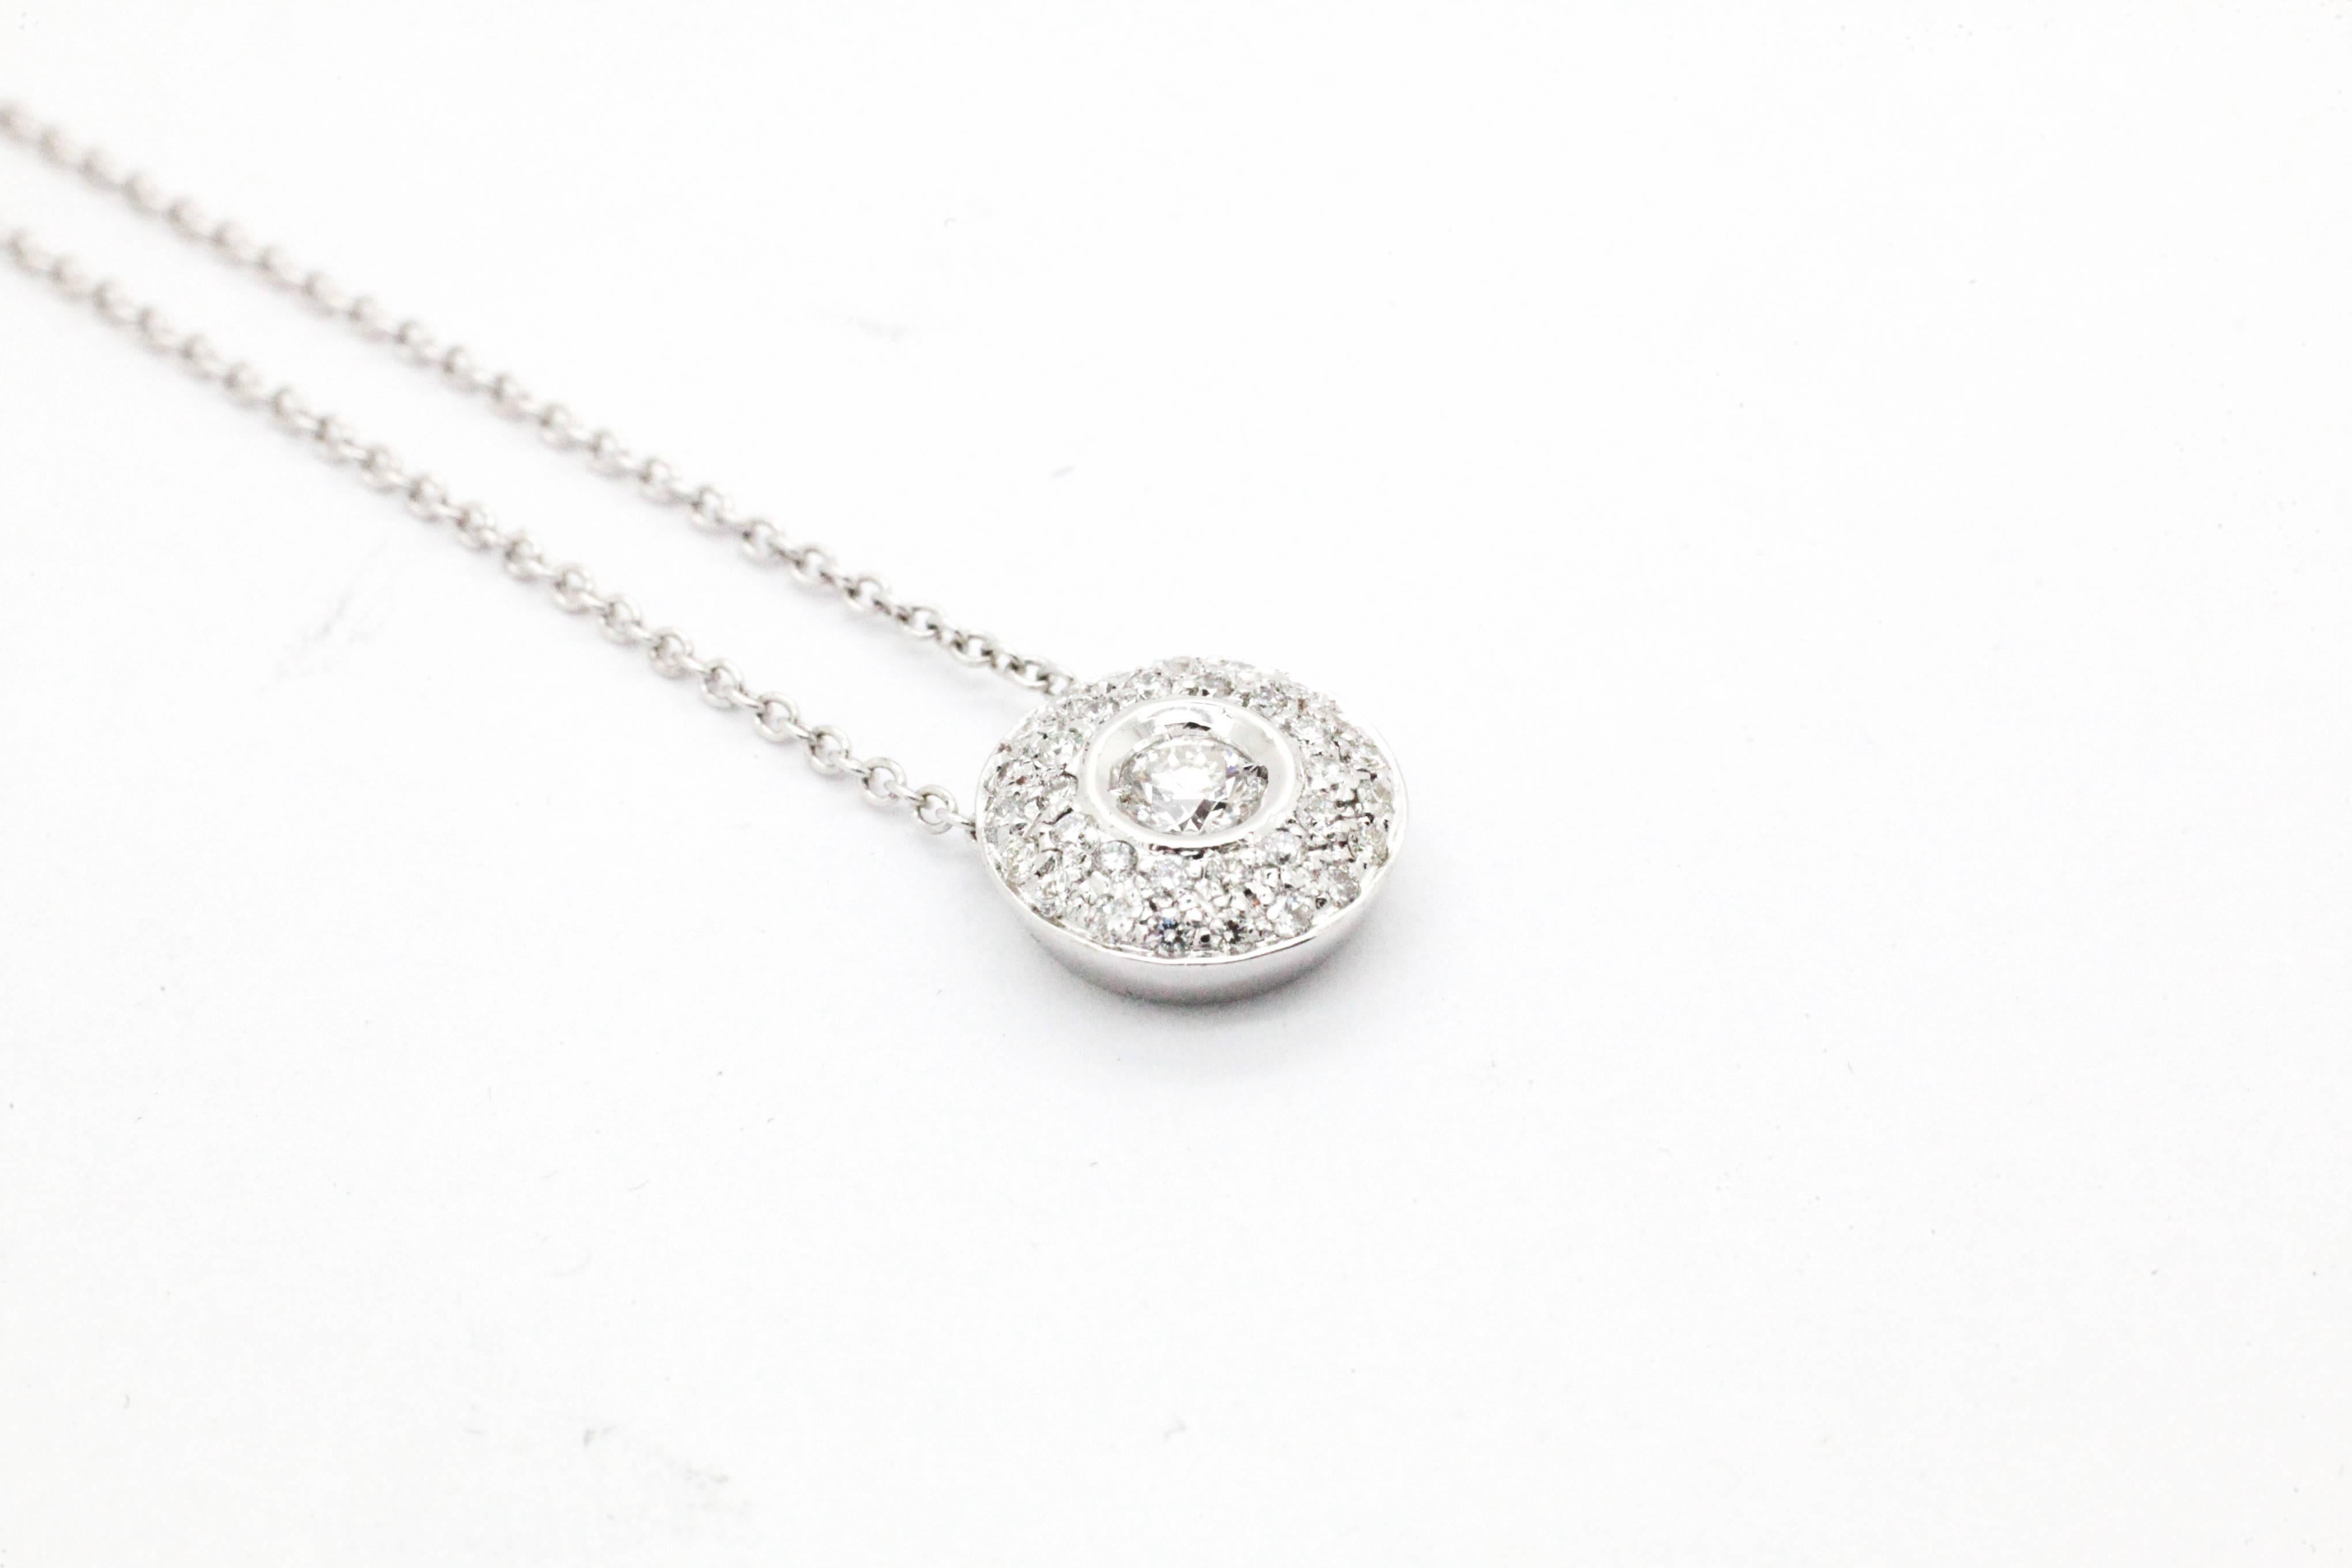 FERRUCCI Round diamonds Pendant in 18k white gold adorned by diamond pave set, for an elegant and fine touch of class, carat weight of 0.42 ct. On a 16